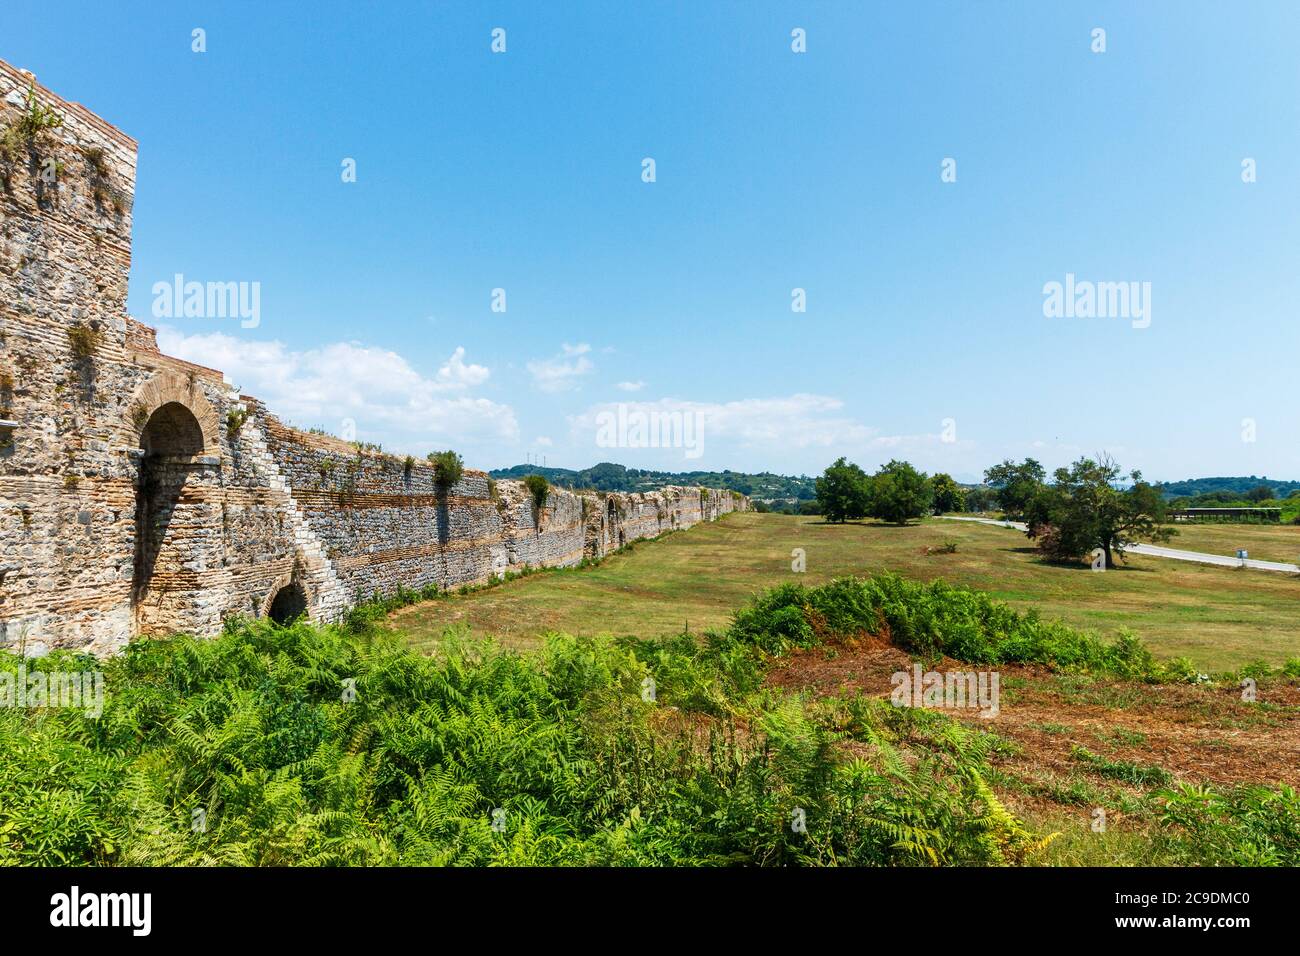 The walls of Ancient Nikopolis (probably the largest archaeological site in Greece) close to Preveza town, Epirus. Stock Photo